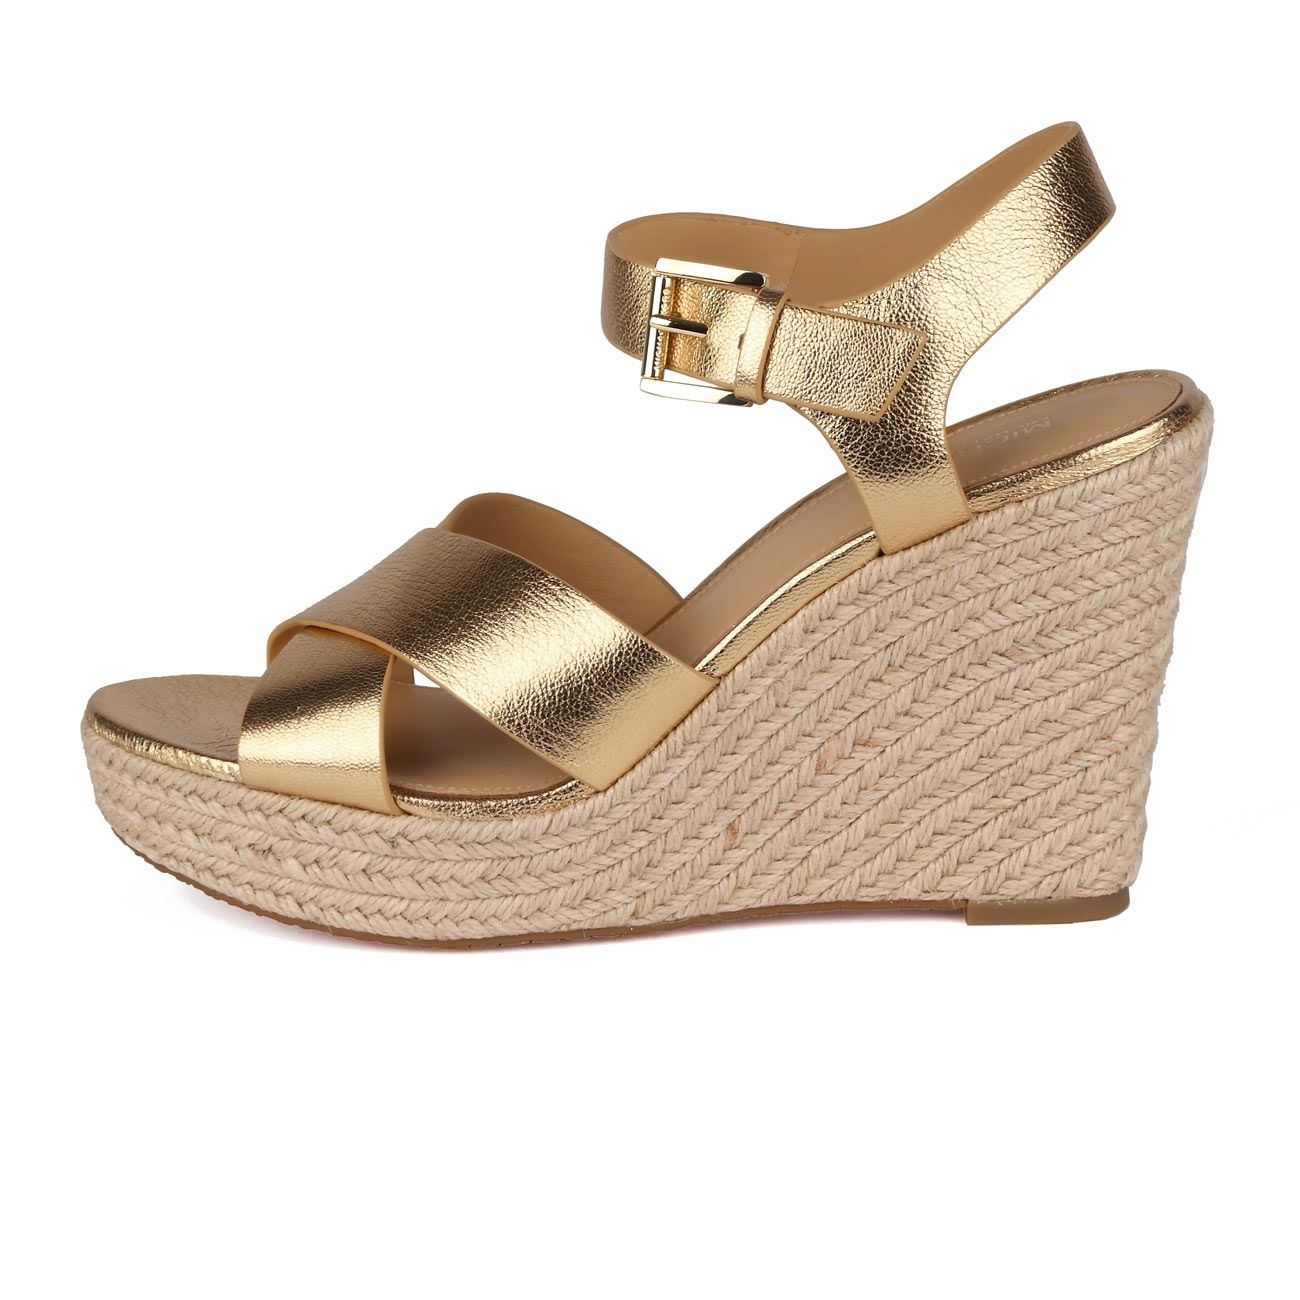 gold wedge sandals thread up